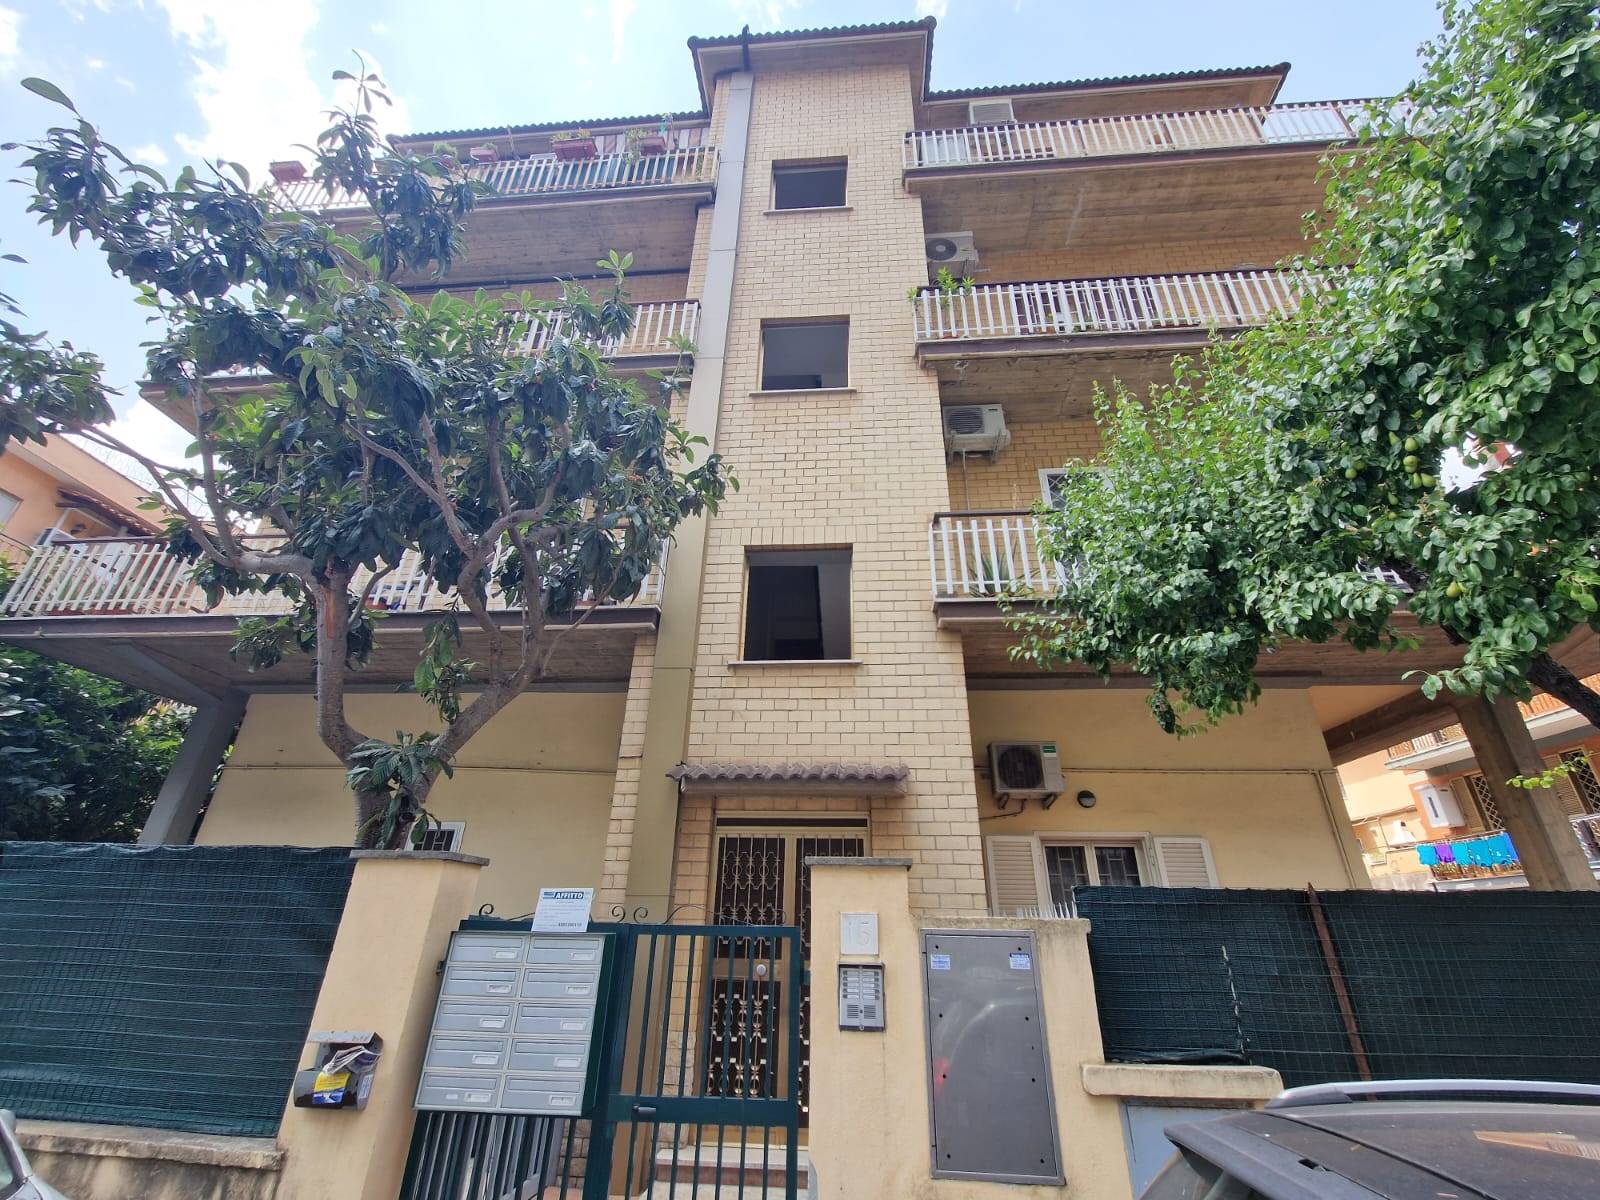 SPINACETO, ROMA, Apartment for sale of 30 Sq. mt., Good condition, Heating Individual heating system, Energetic class: F, placed at 3°, composed by: 1 Room, Kitchenette, 1 Bedroom, 1 Bathroom, 